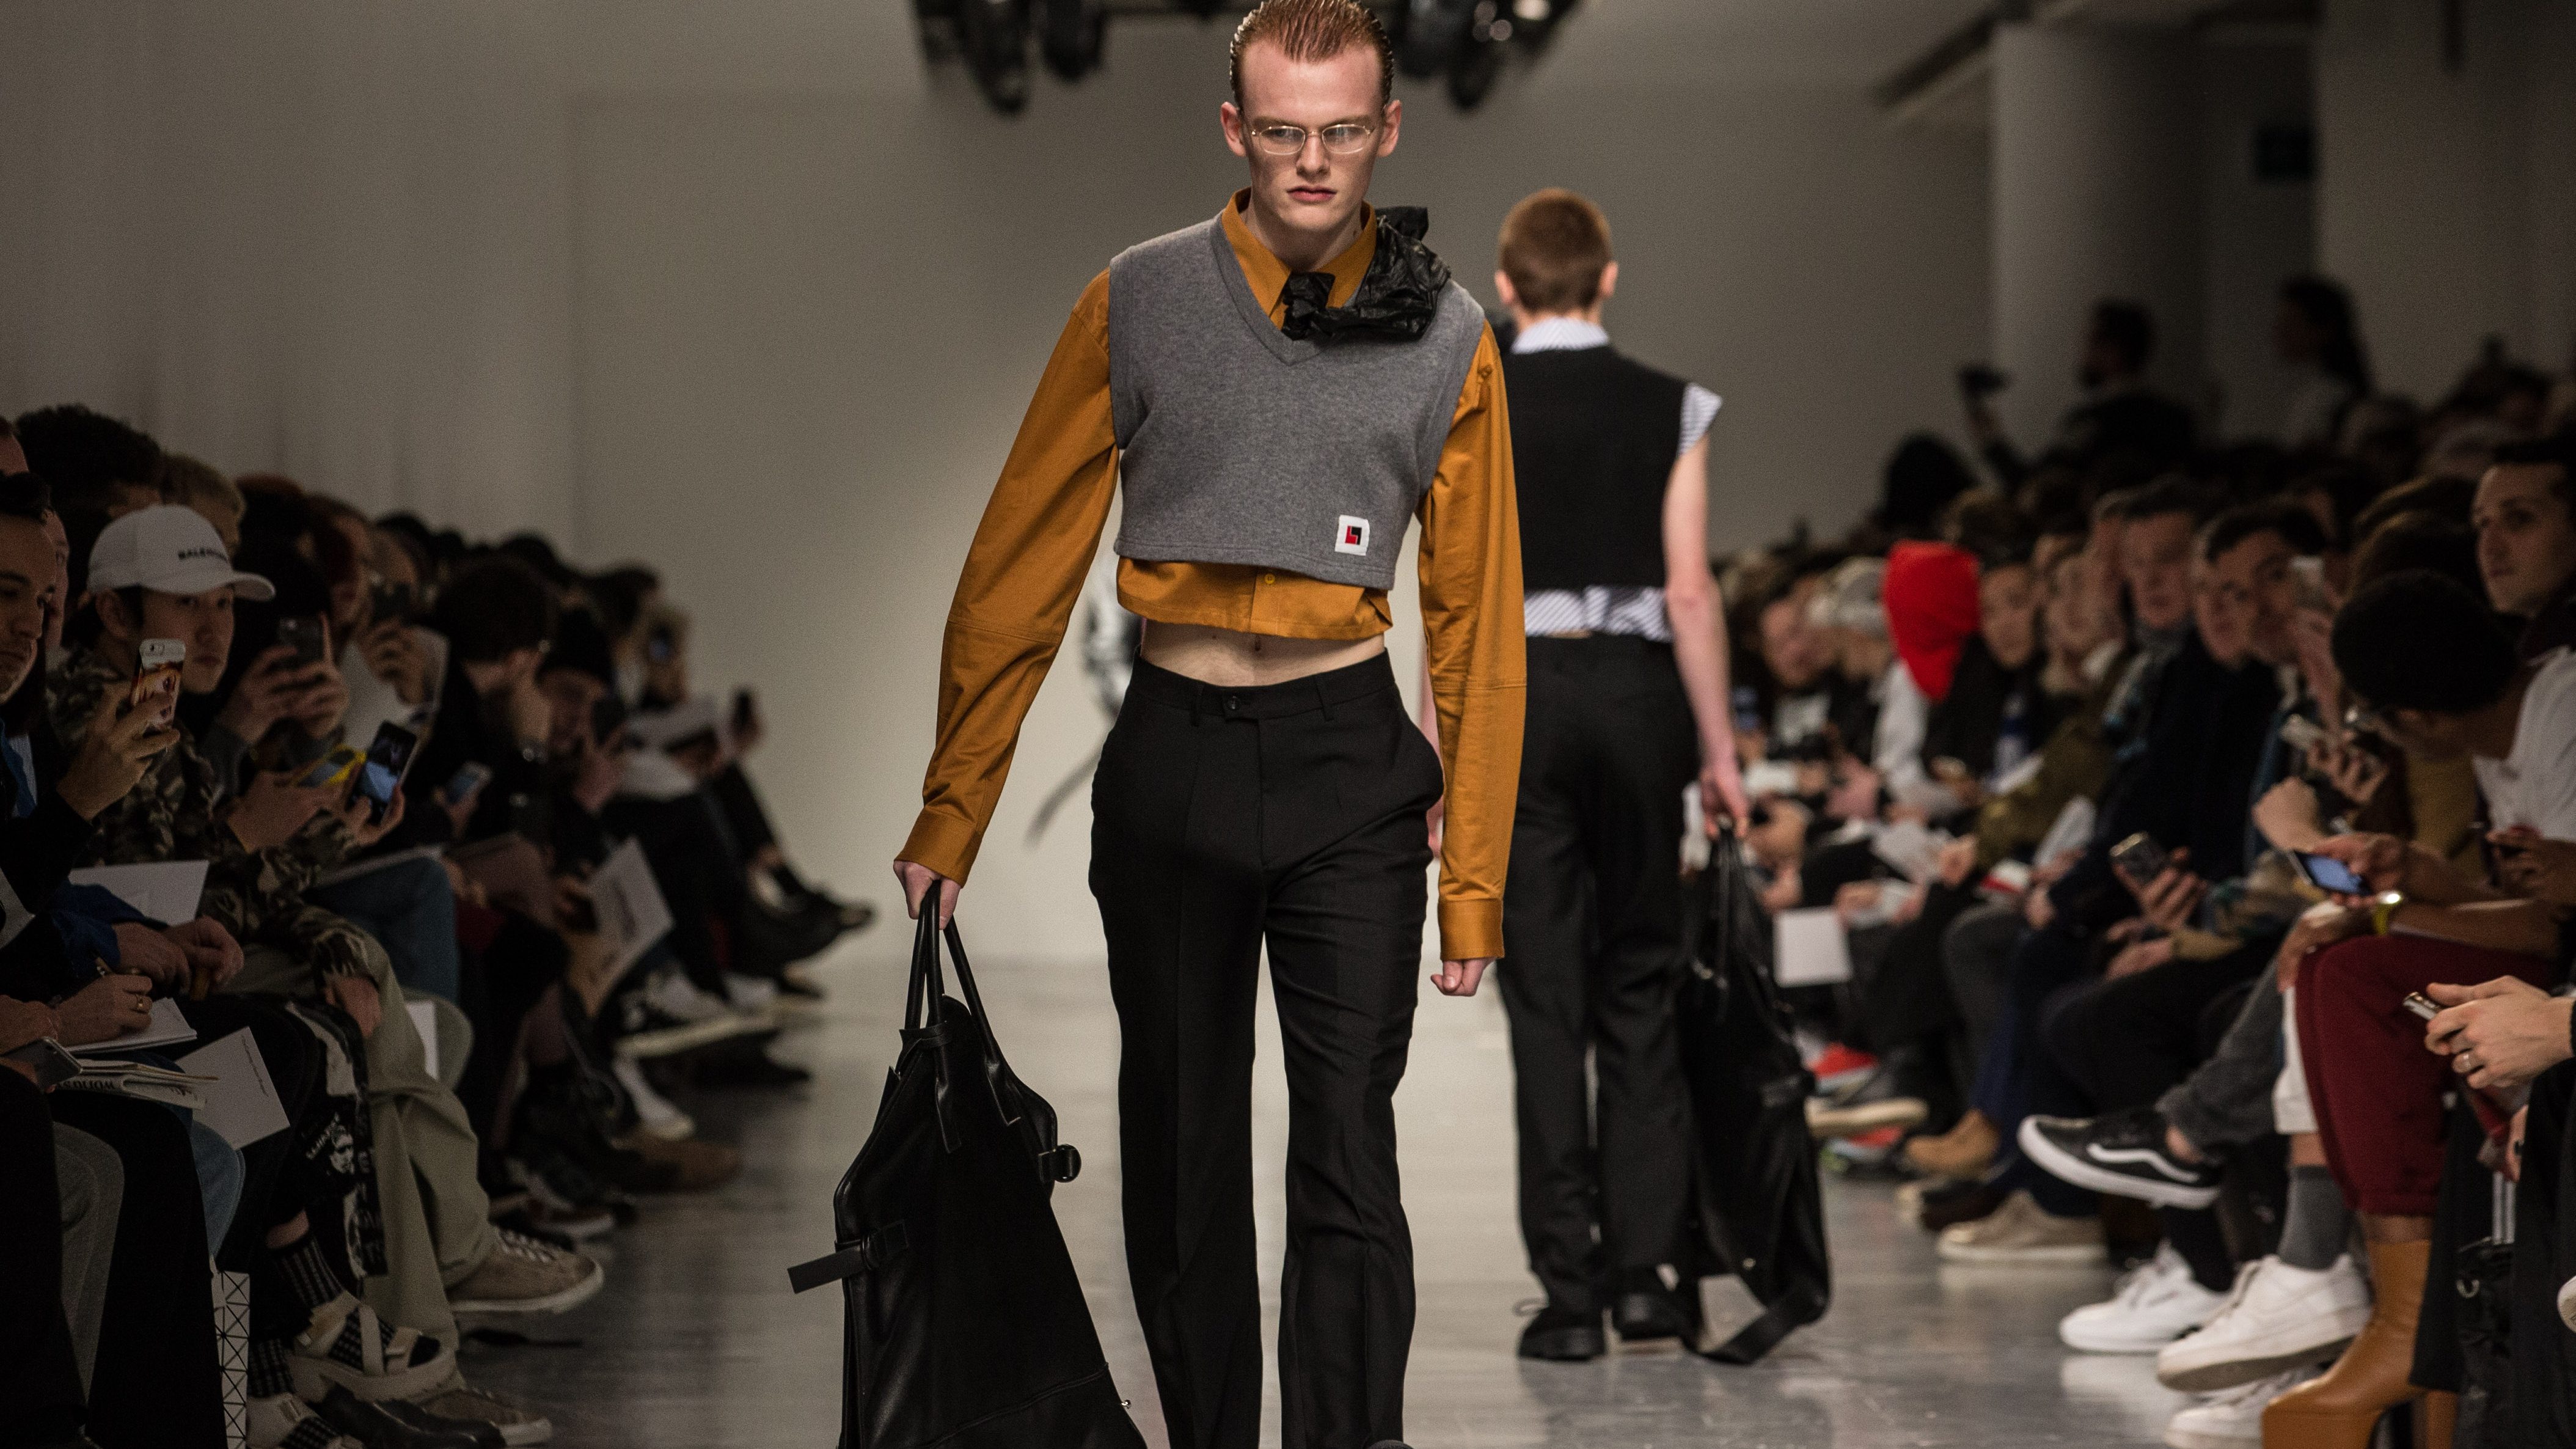 How you can get 3 Men’s London Fashion Week looks on a student budget